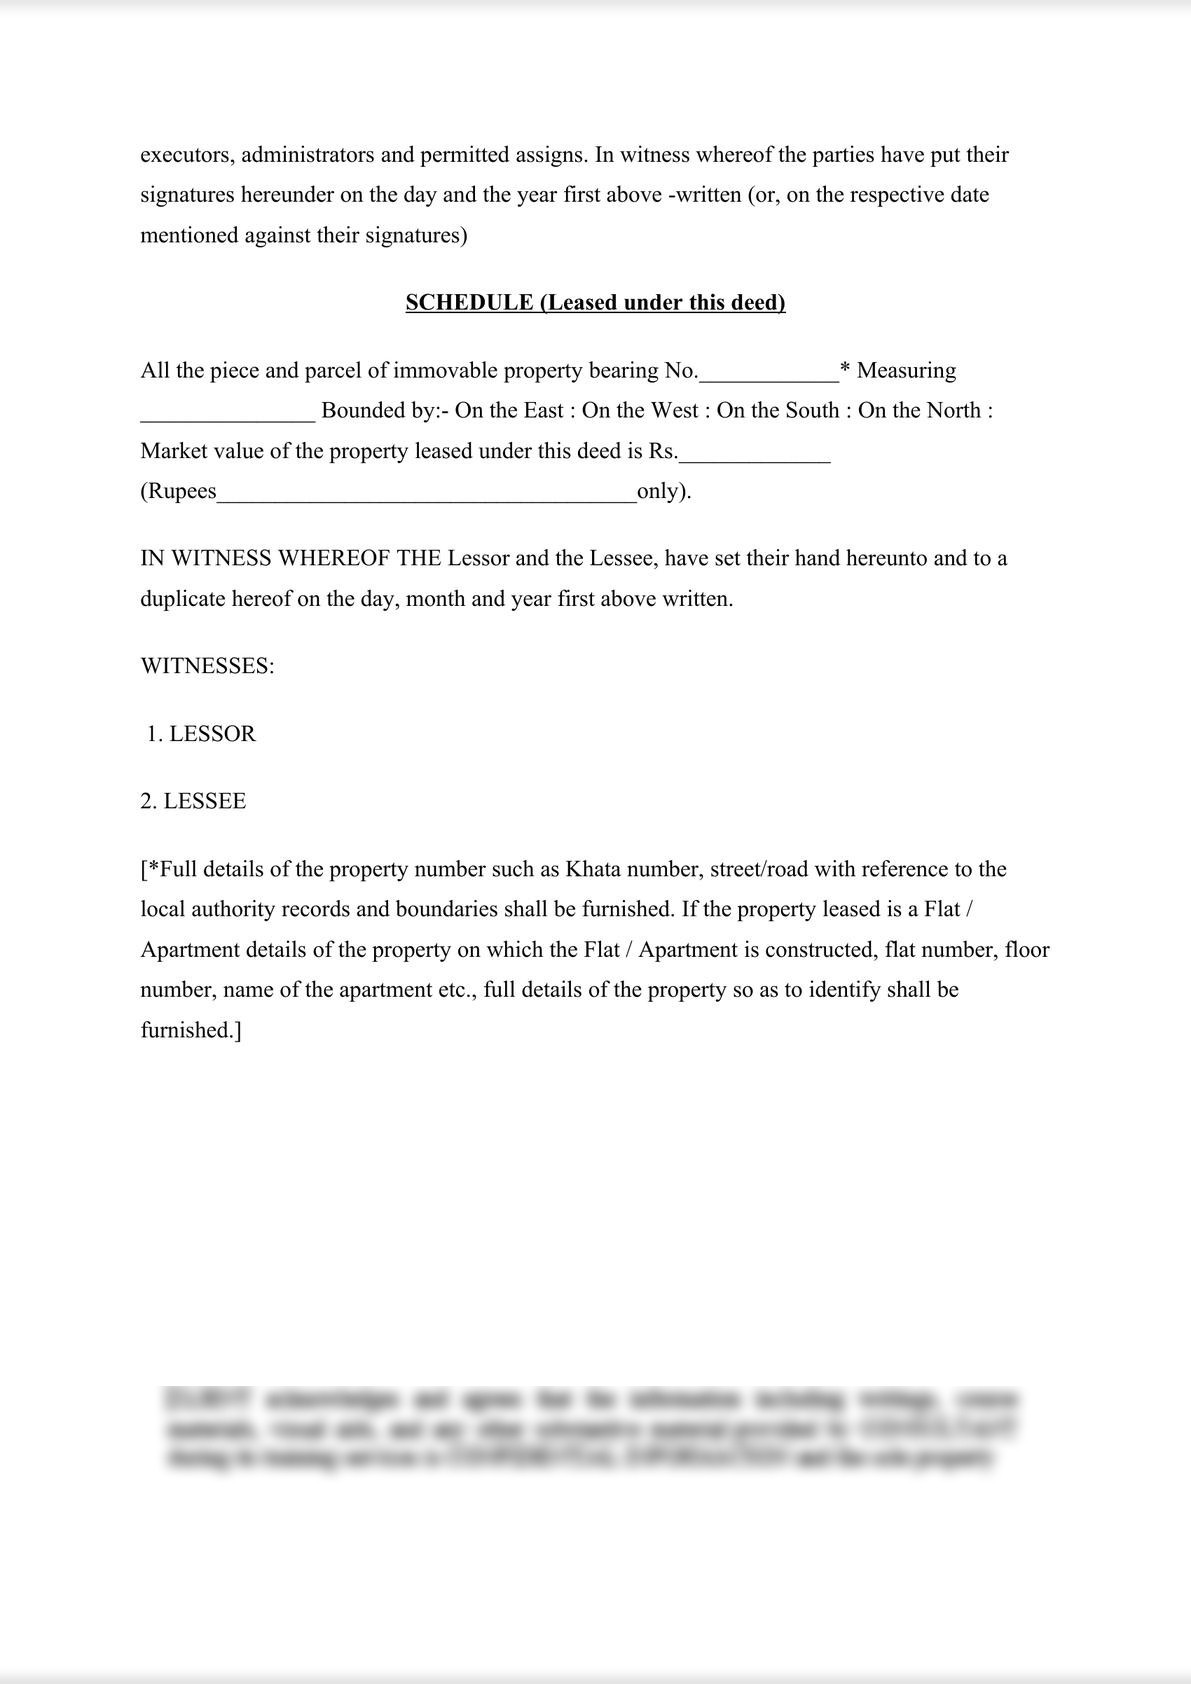 Lease Deed for 11 months - Indian format-2